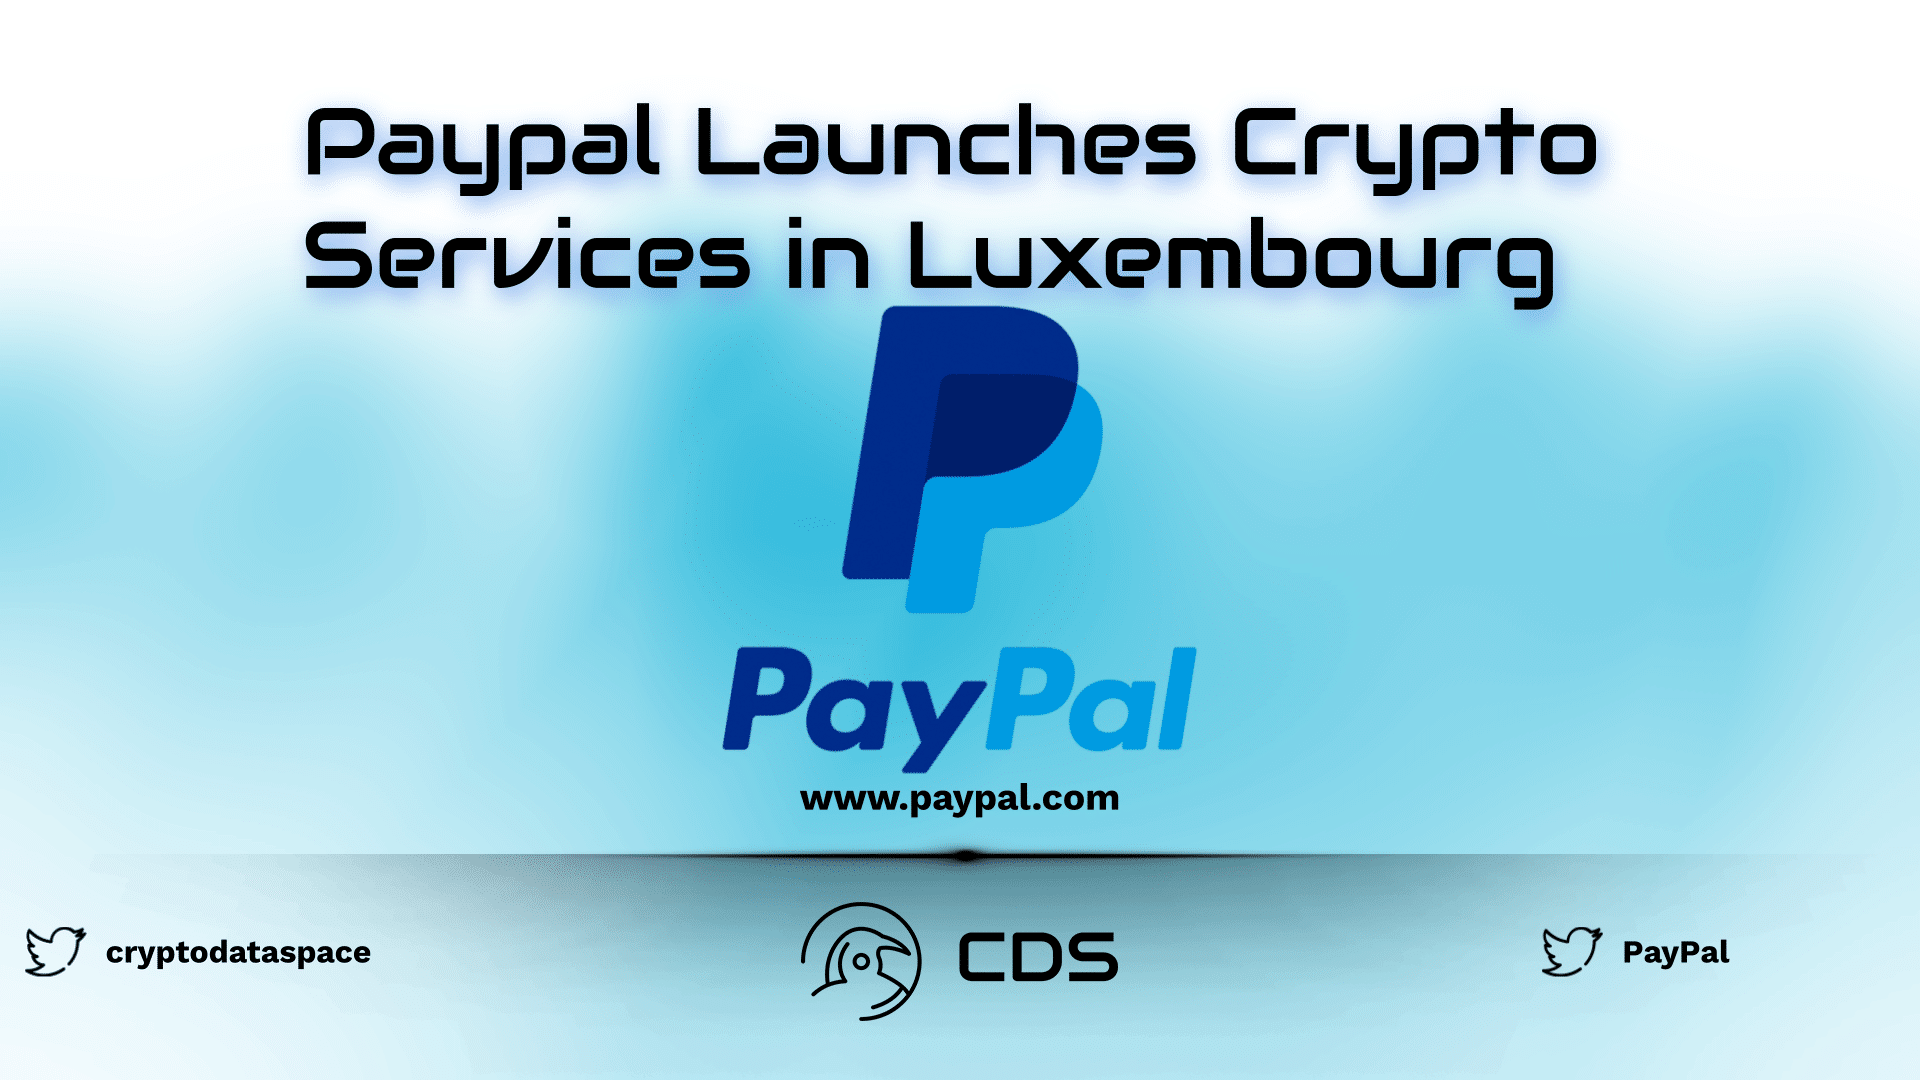 Paypal Launches Crypto Services in Luxembourg